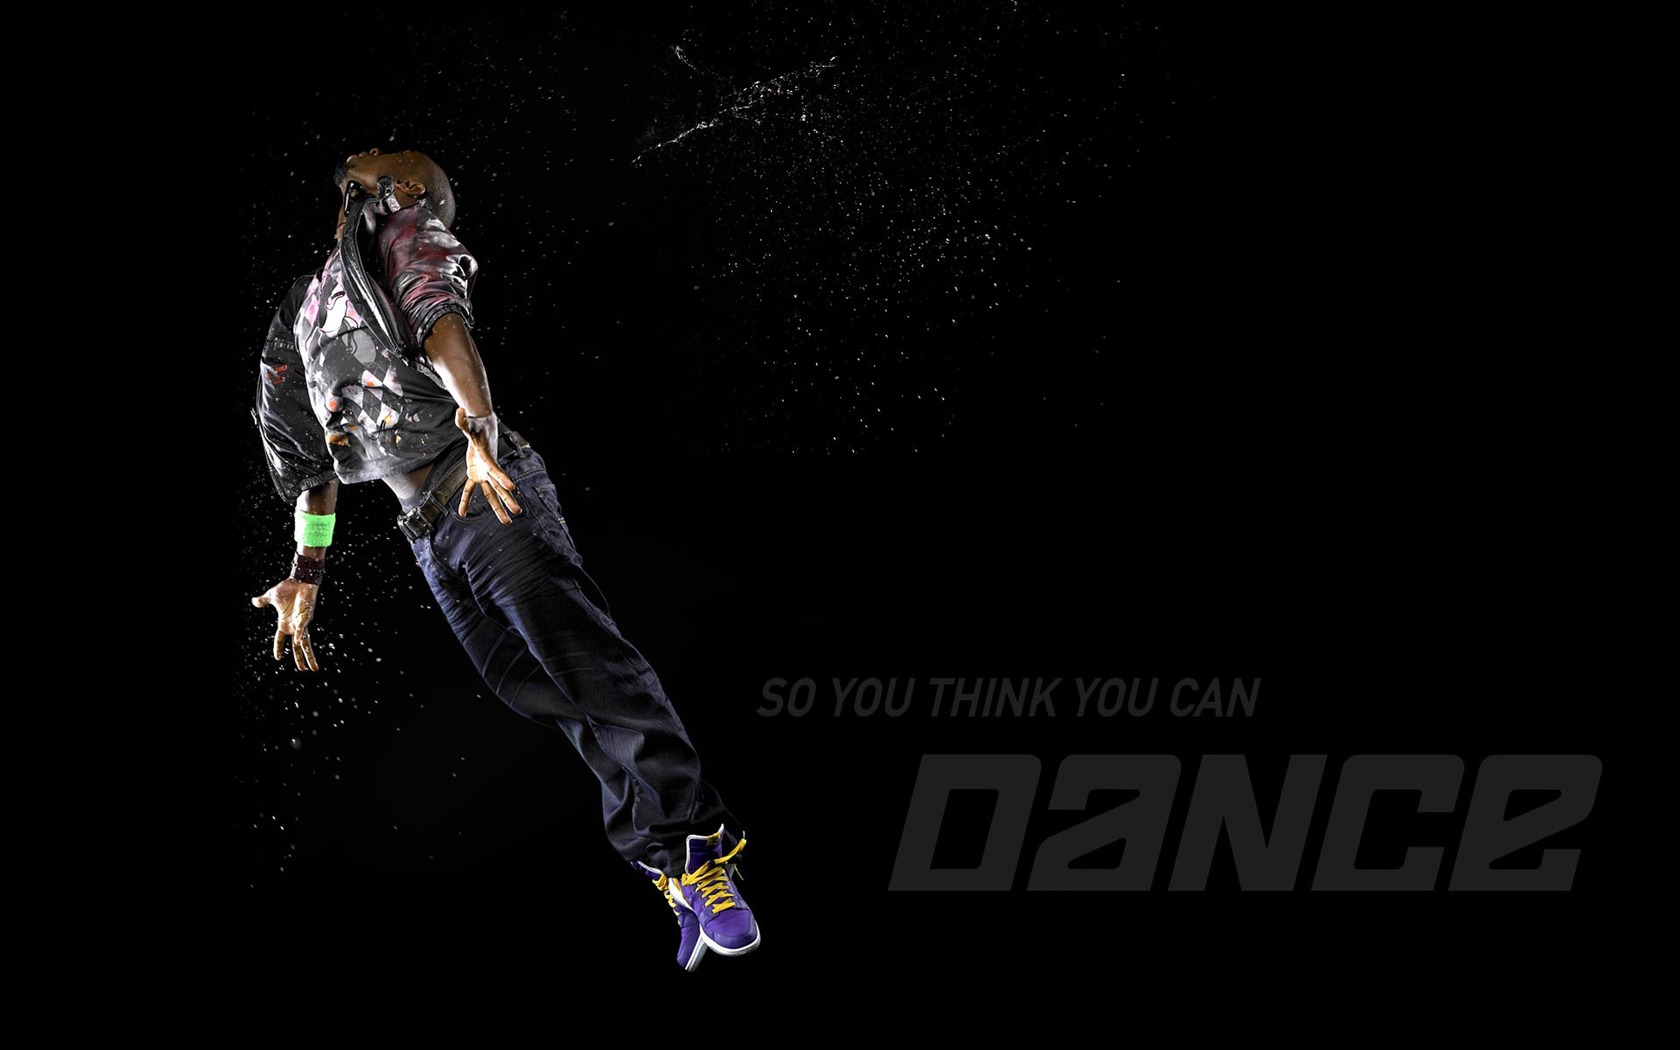 So You Think You Can Dance 舞林爭霸壁紙(一) #10 - 1680x1050